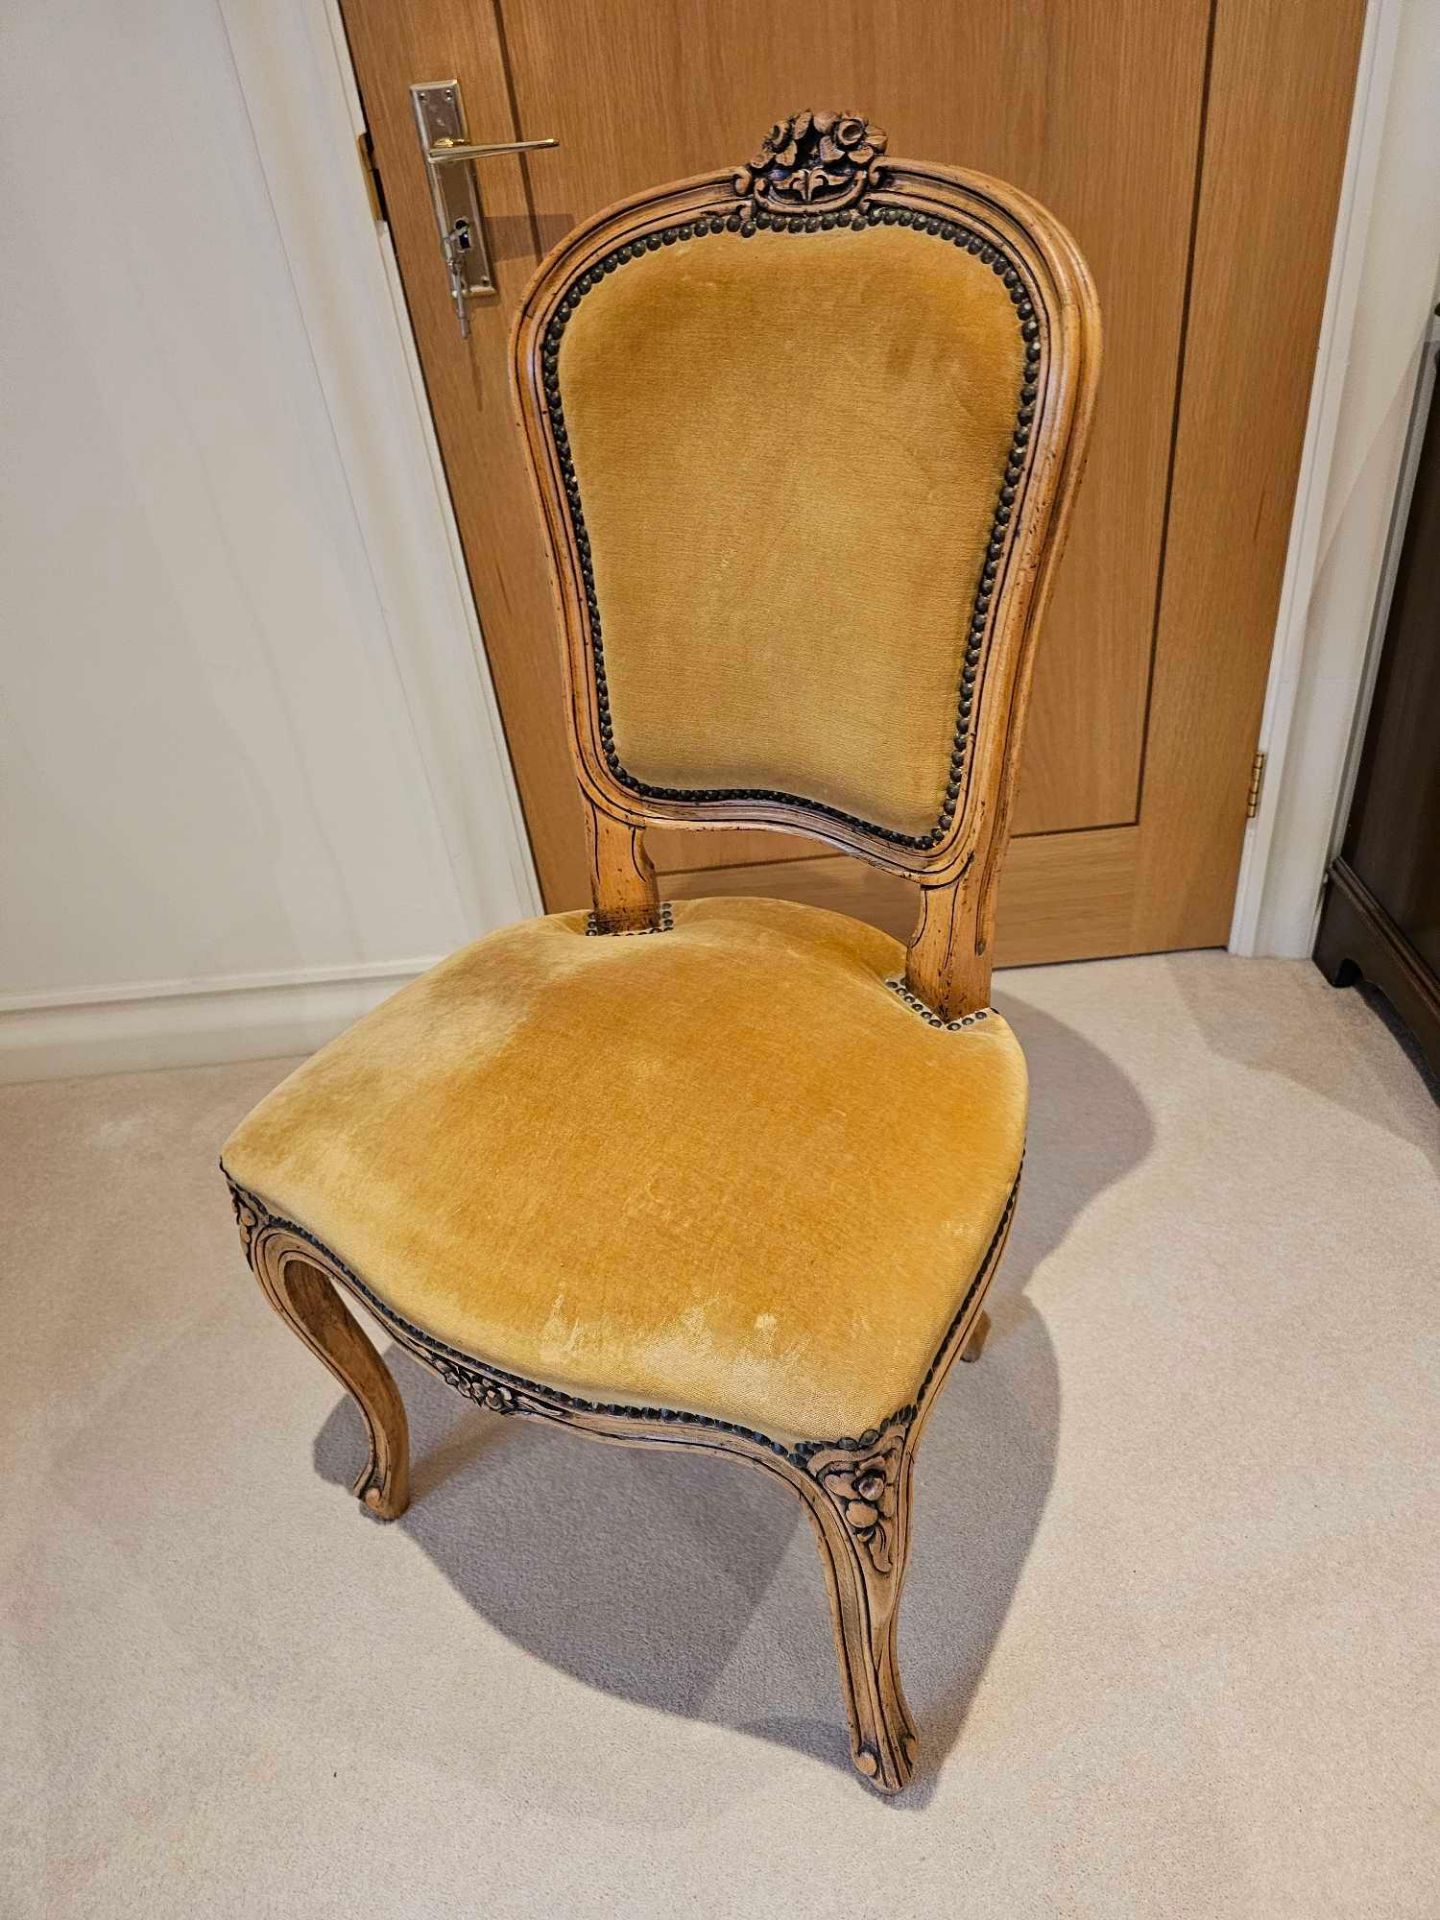 French Beechwood Side Chair, Louis XV Style, The Shaped Rectangular Back With Floral Cresting, - Image 3 of 5